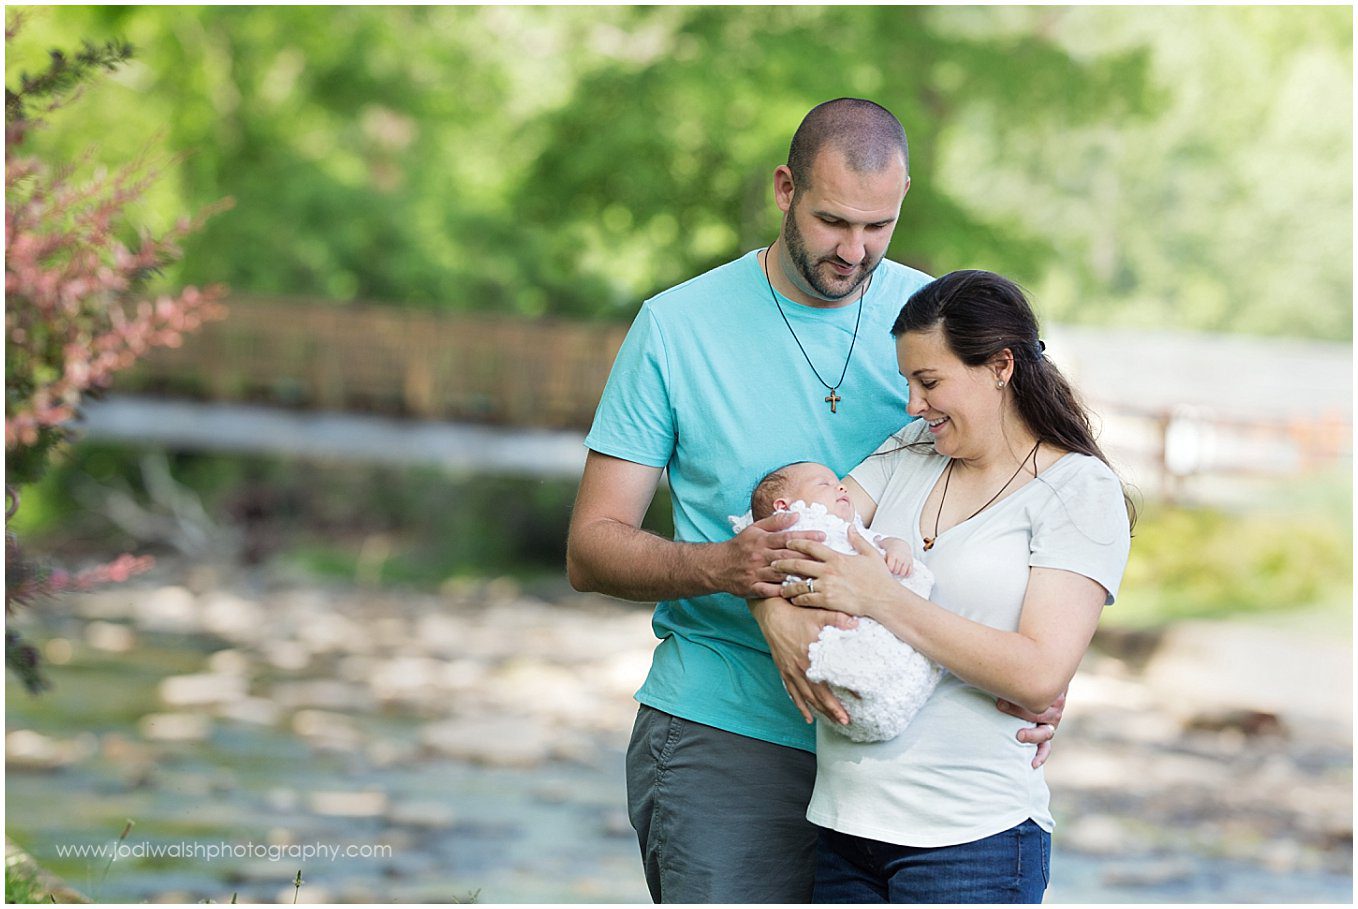 image of a young couple with a newborn. They're standing together and looking down at the baby in mom's arms. There is a creek and a footbridge in the background.